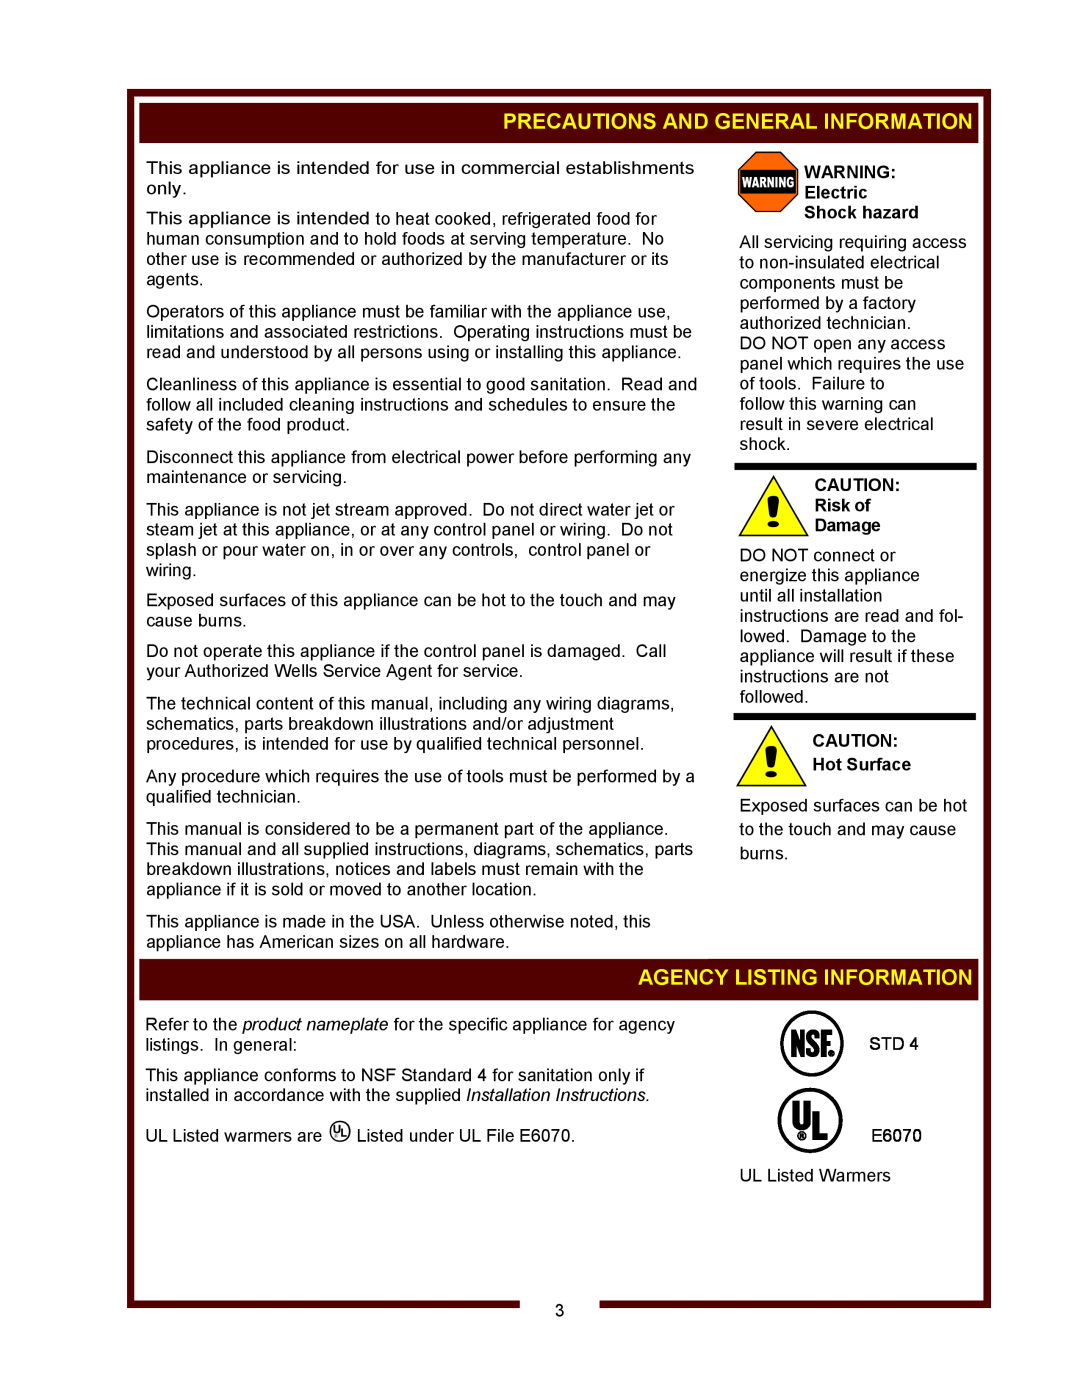 Wells HW/SMP-6D Precautions And General Information, Agency Listing Information, Electric Shock hazard, Risk of Damage 